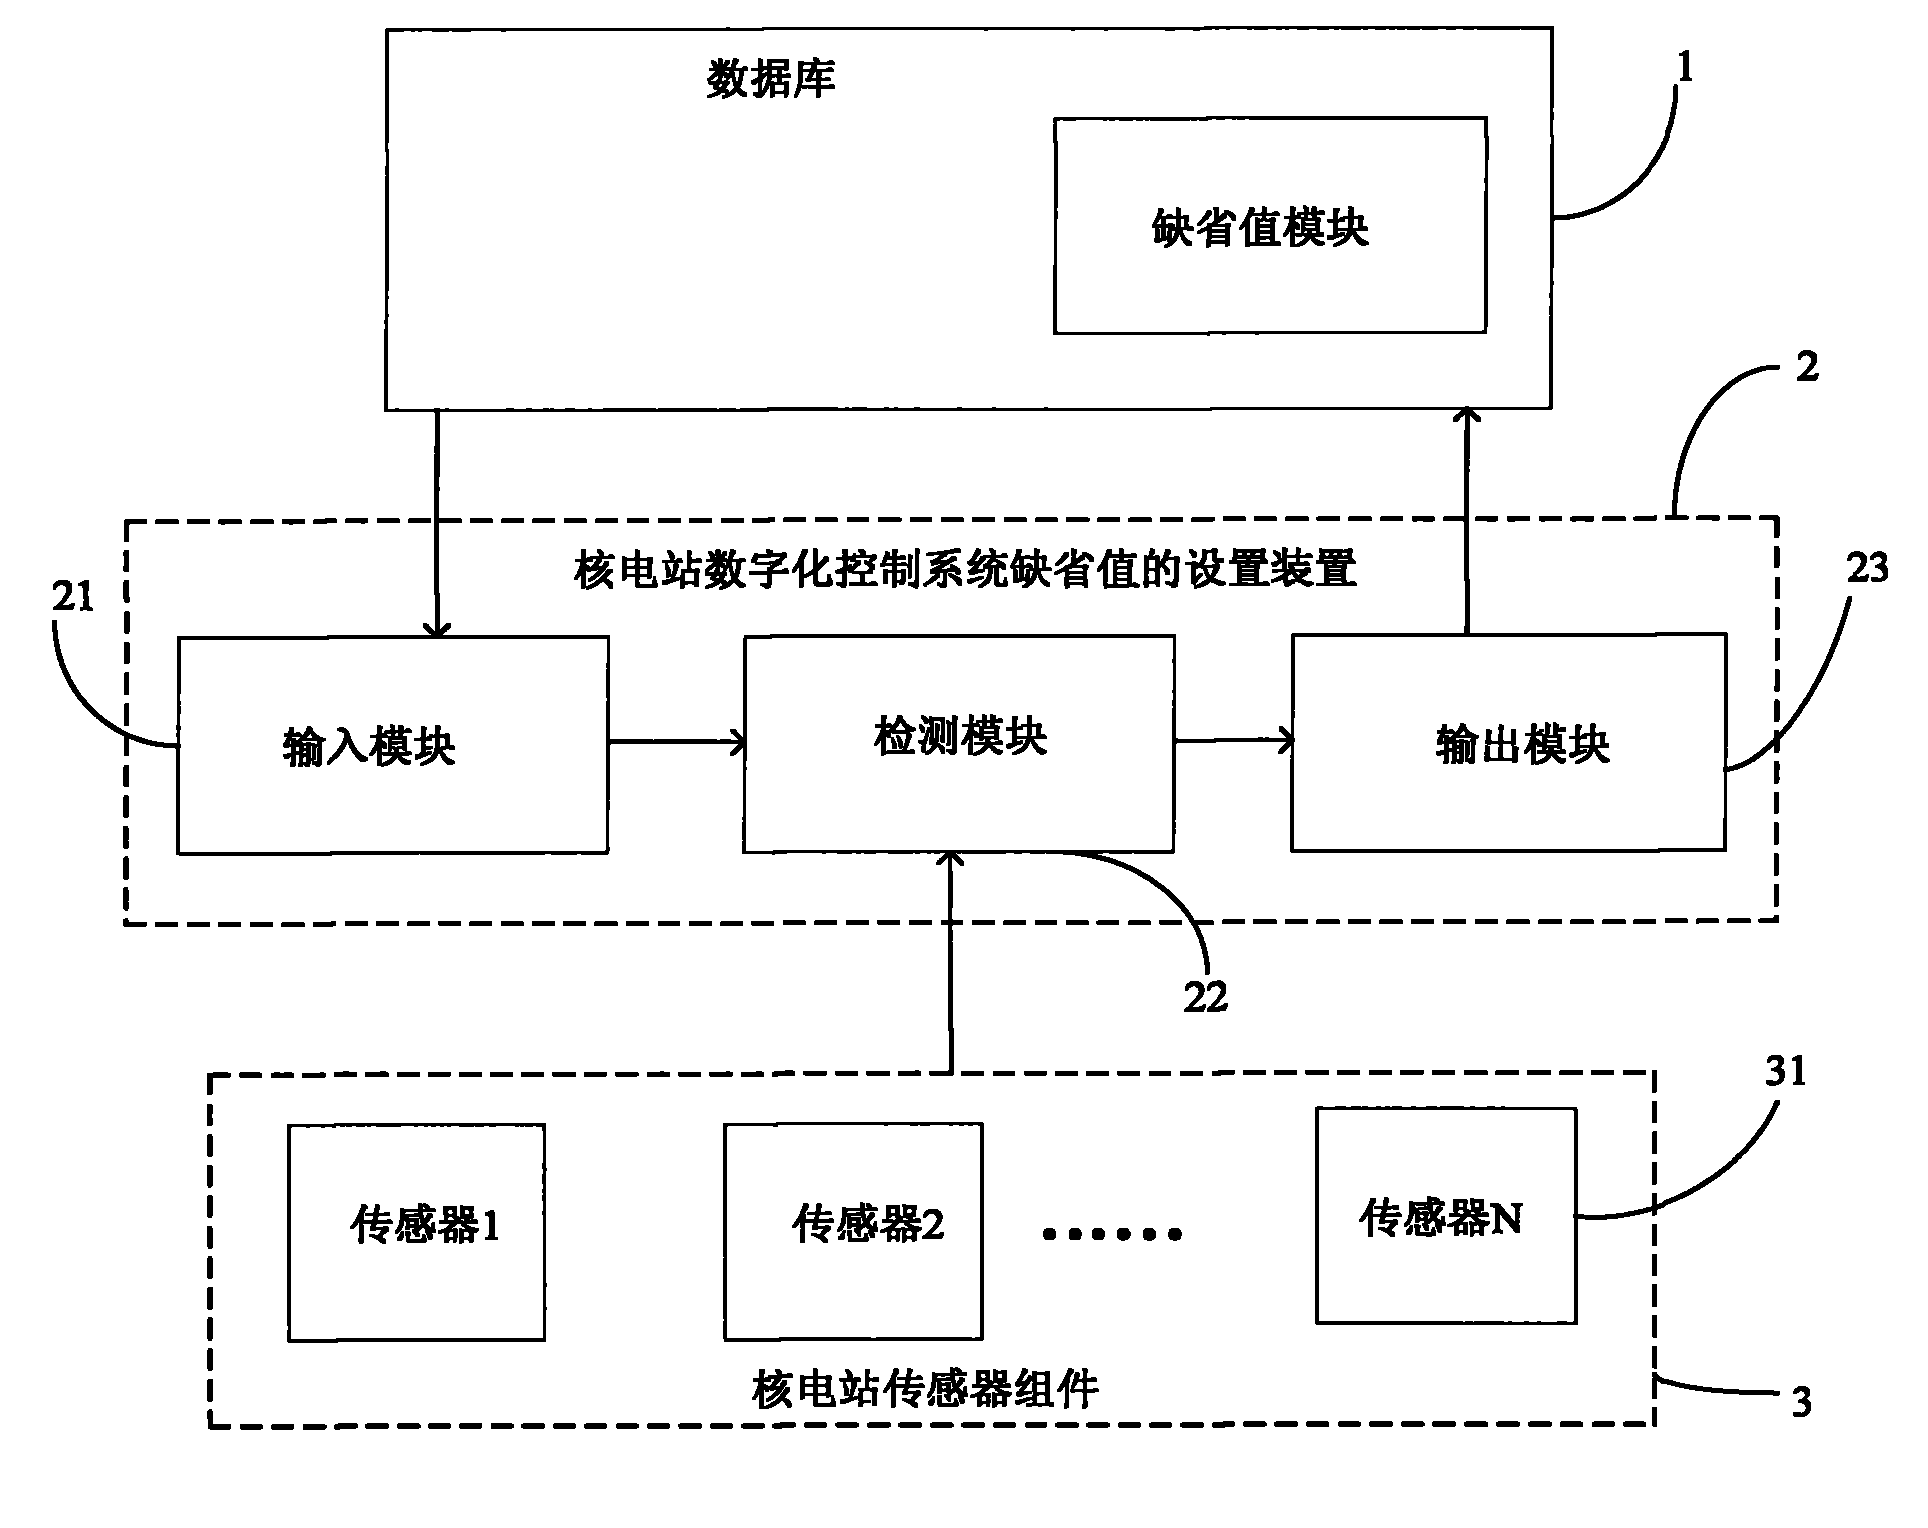 Method and system for setting default value of digital control system in nuclear power plant